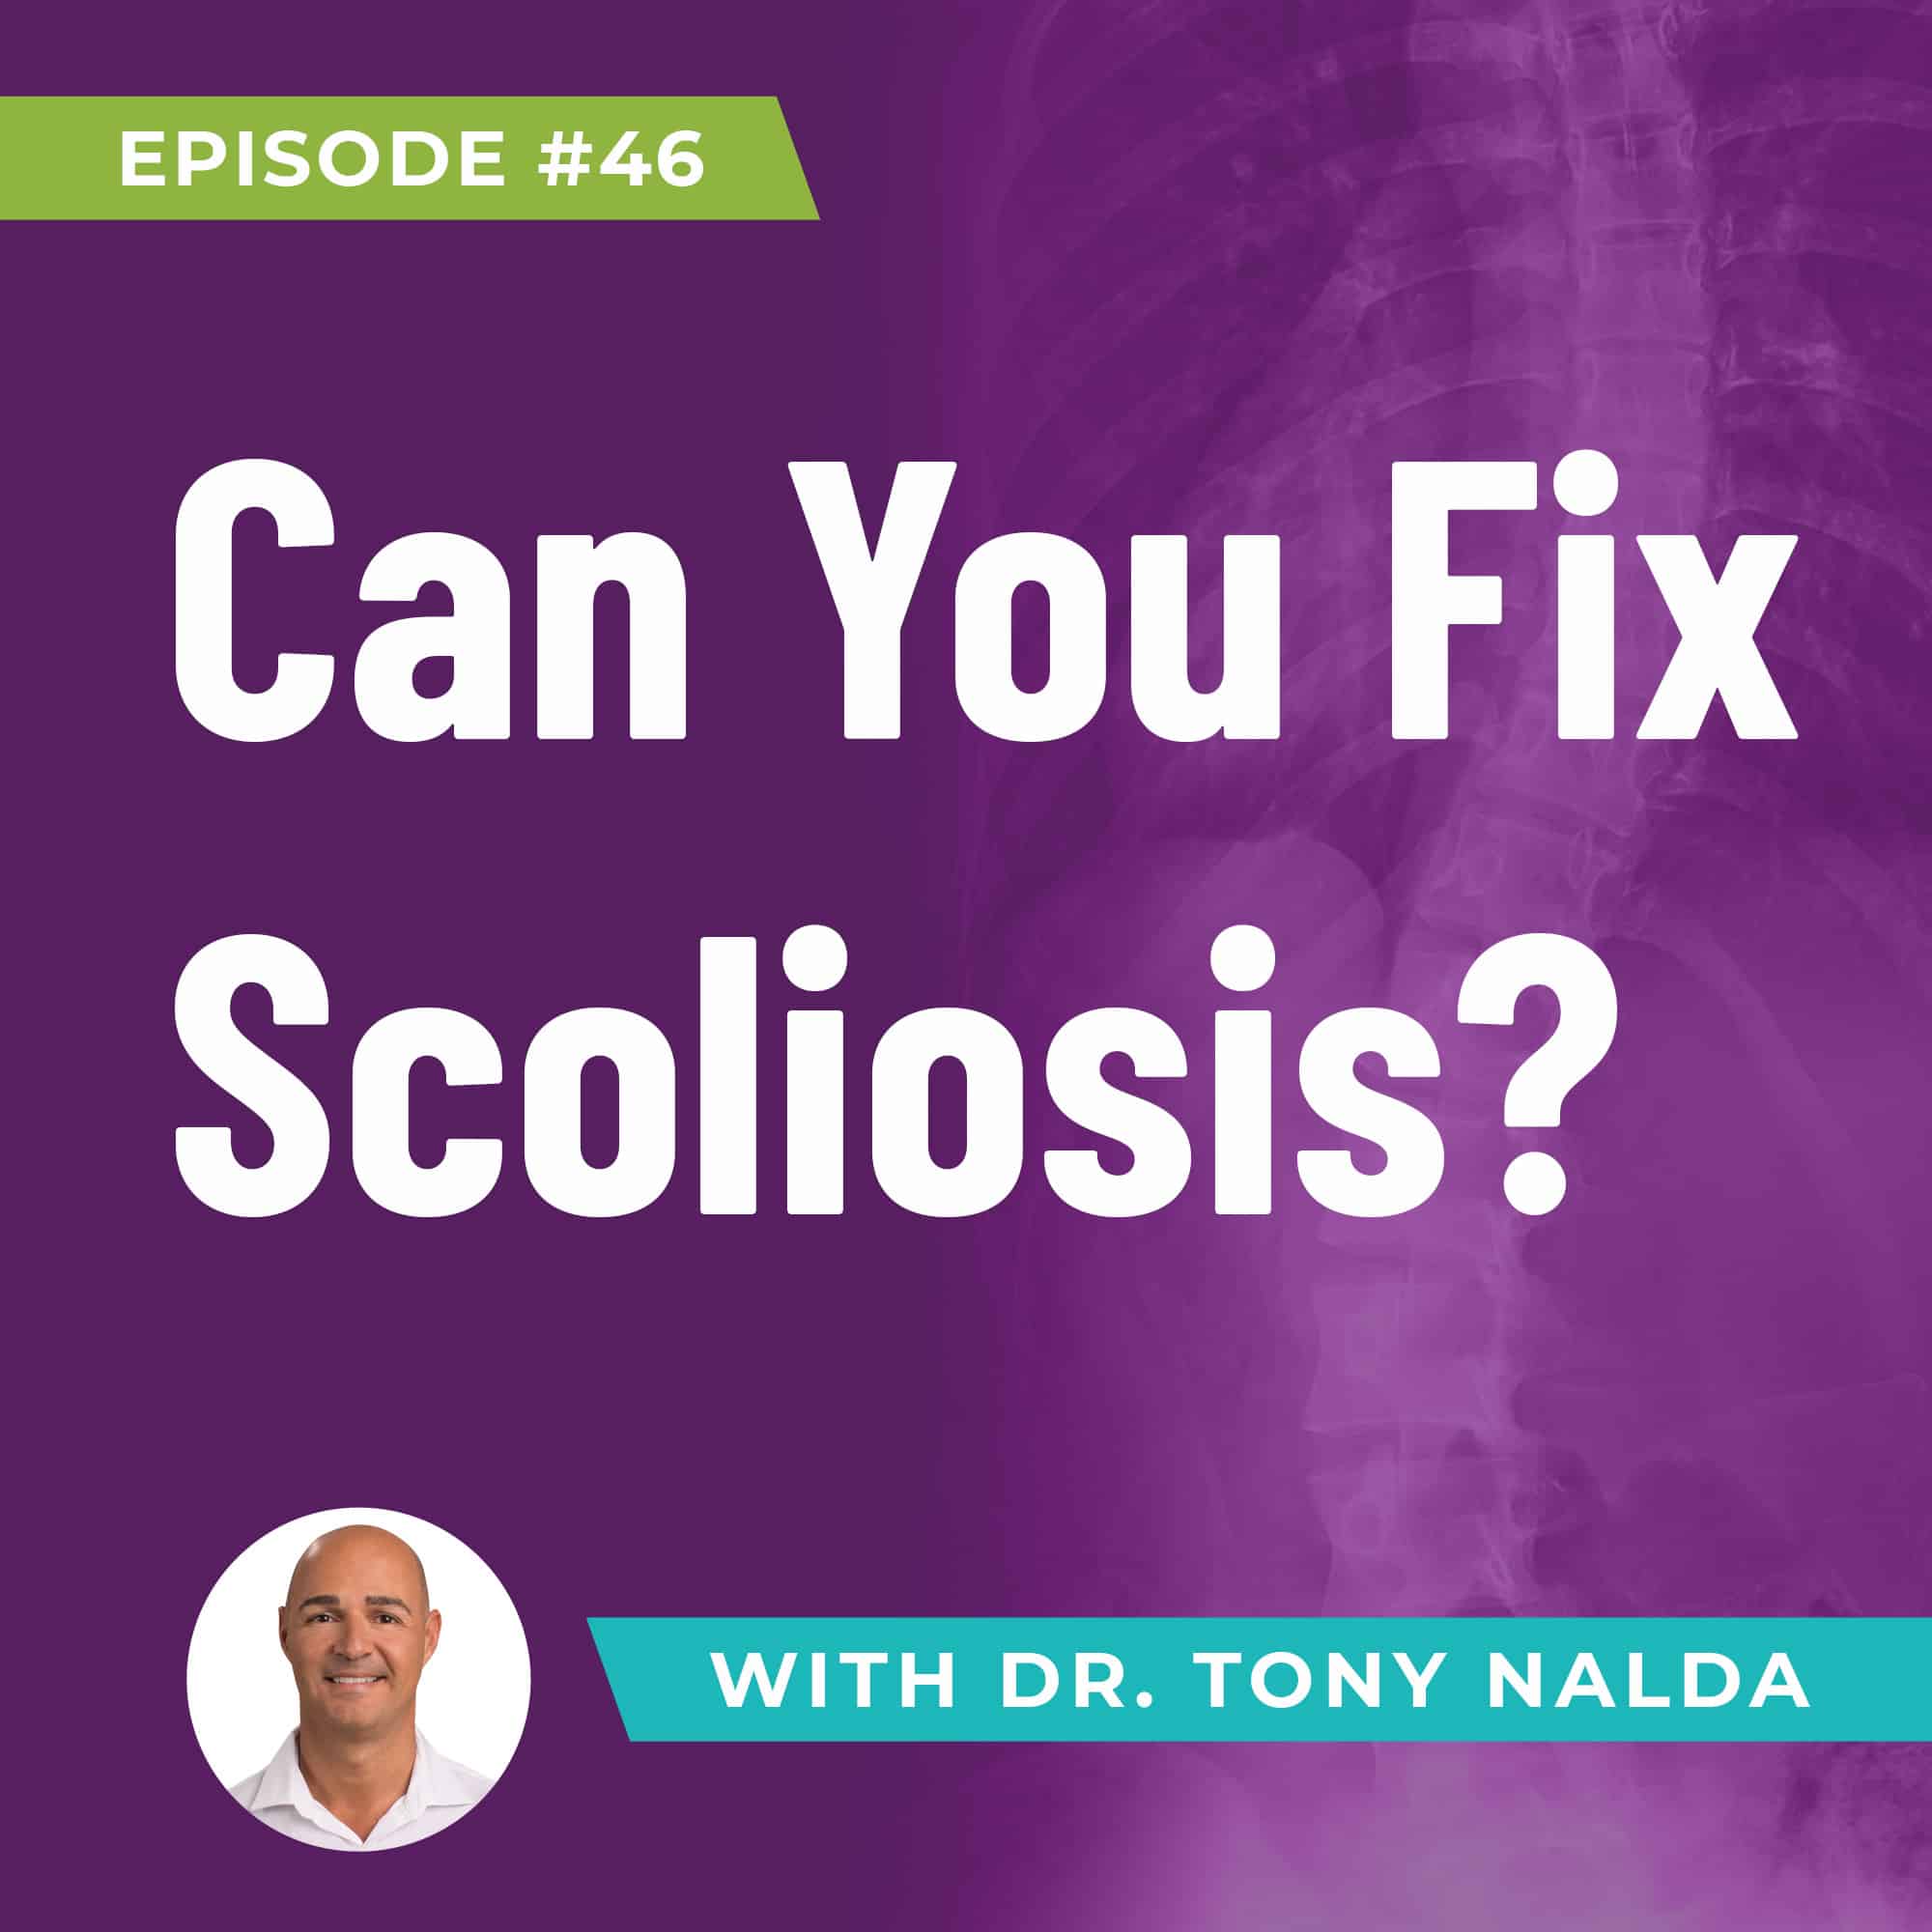 Can You Fix Scoliosis?